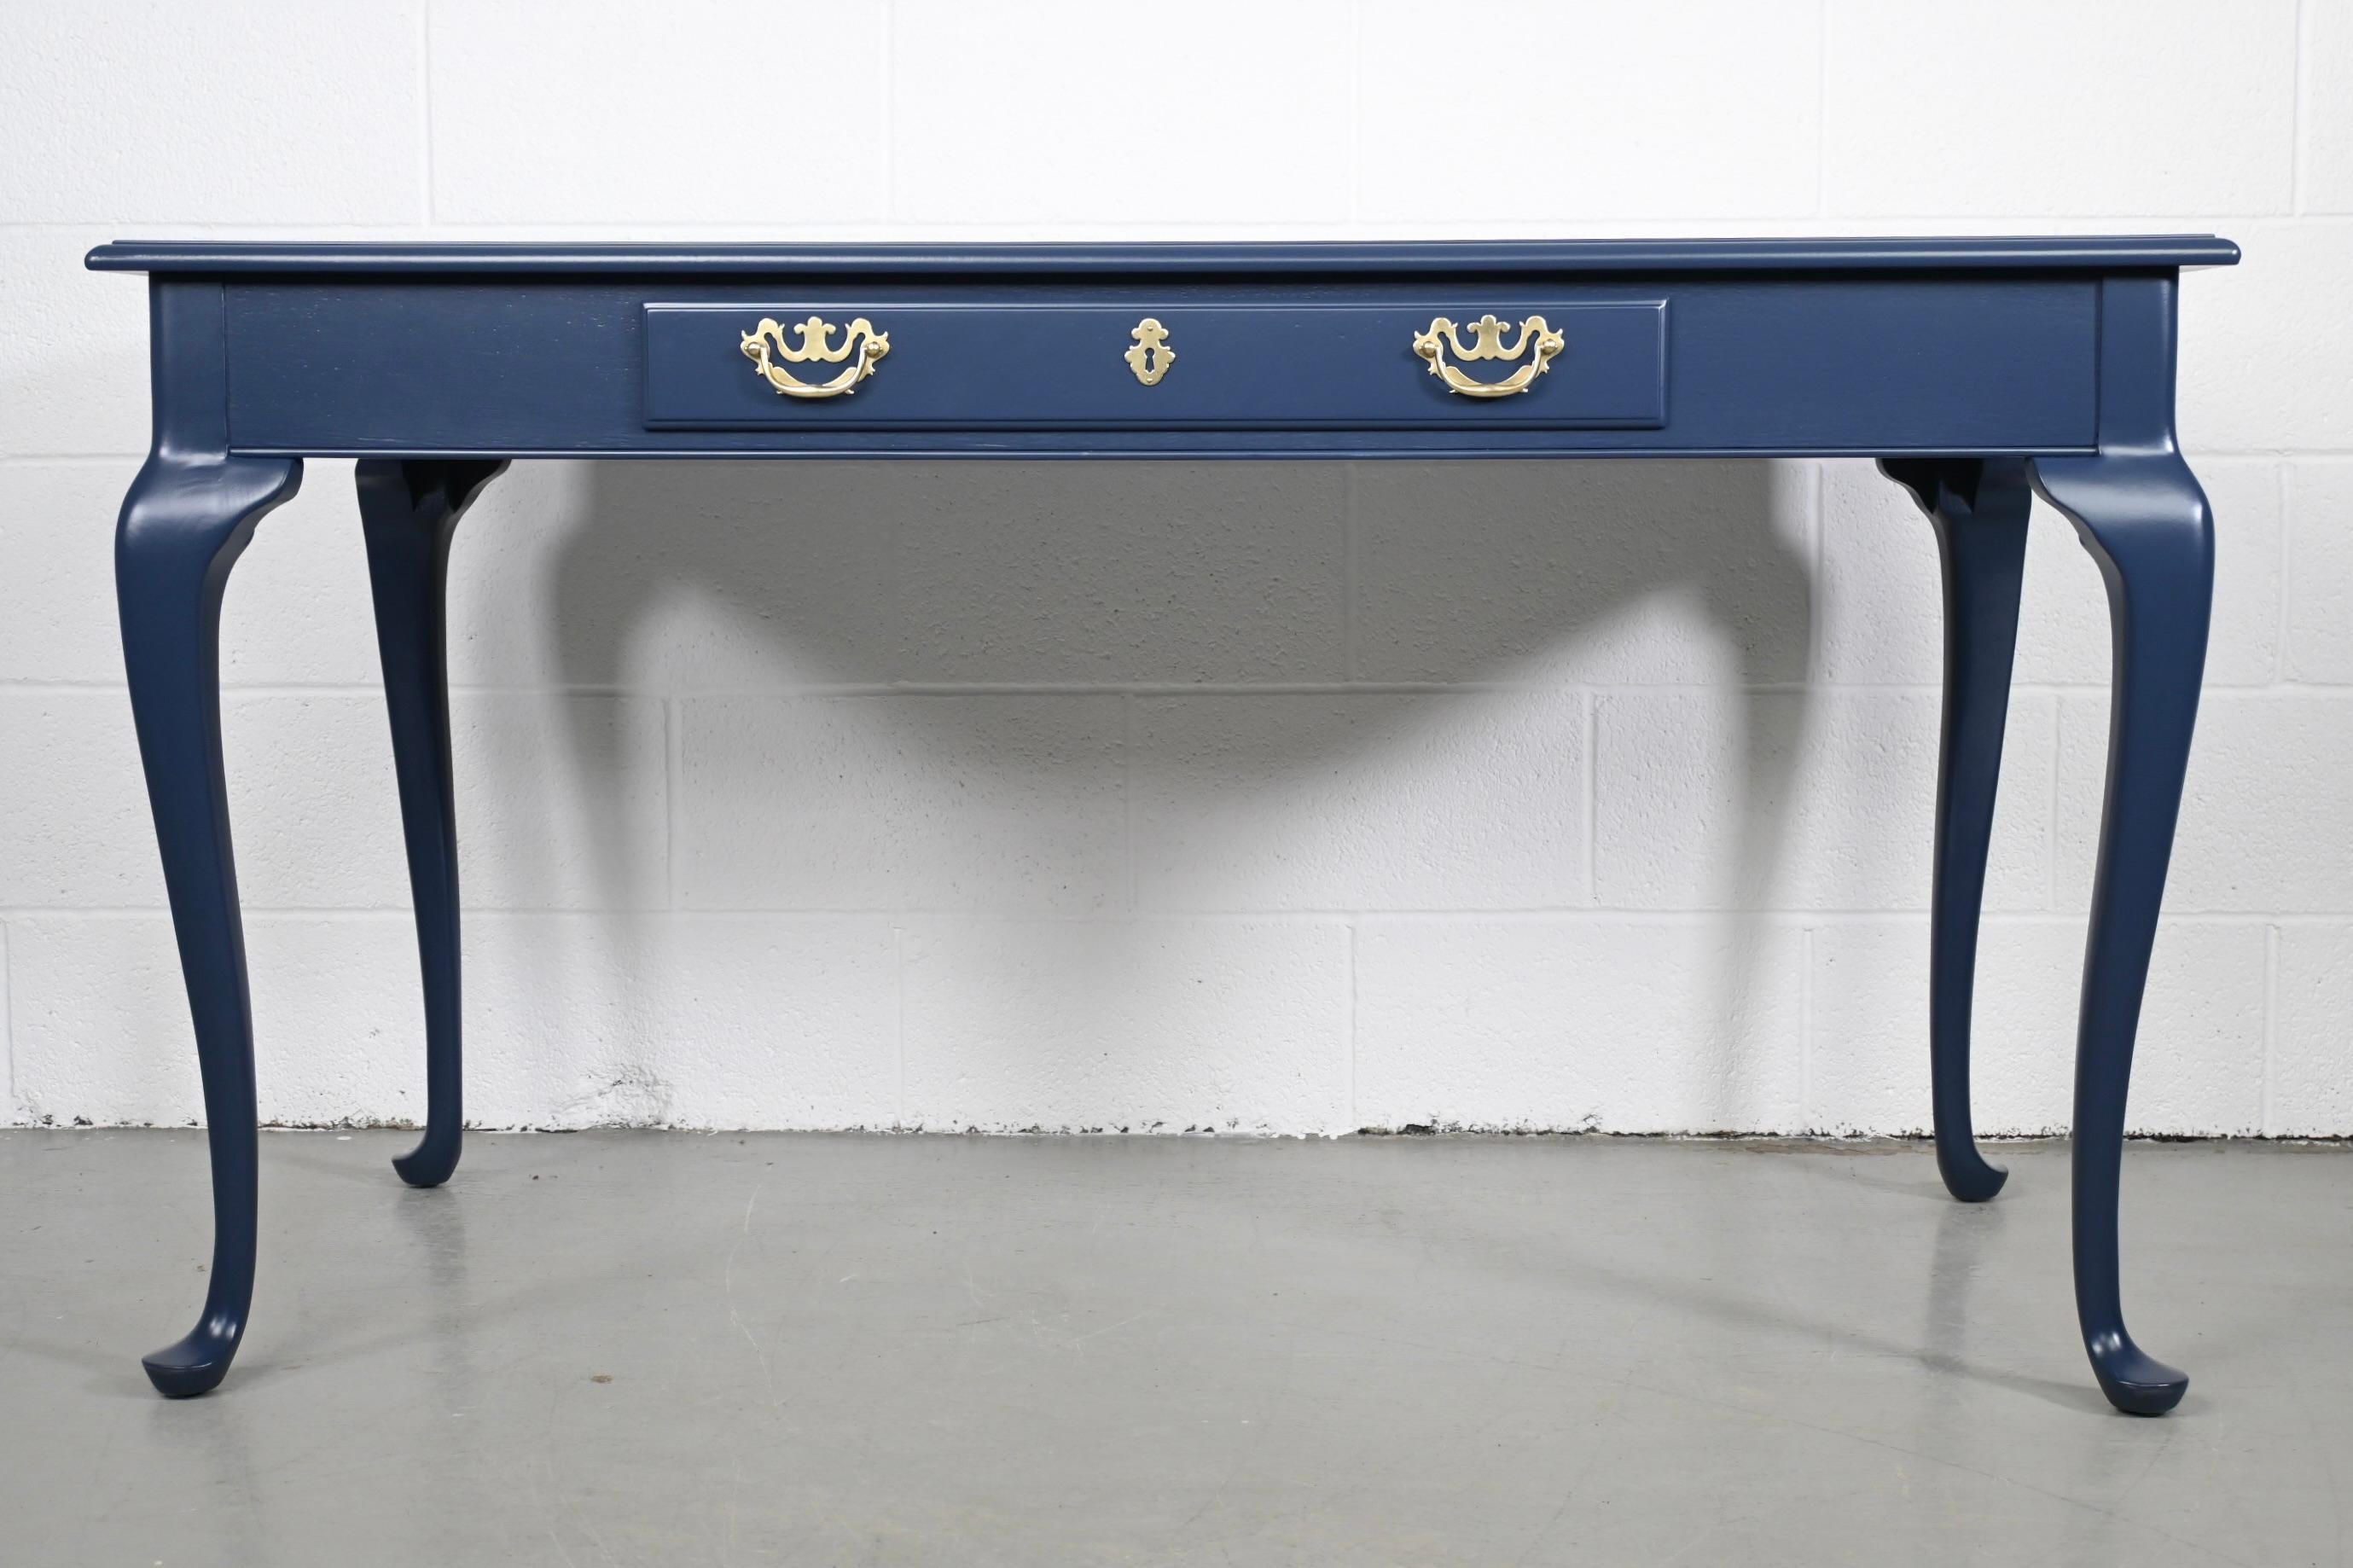 Drexel Queen Anne Style navy lacquer writing desk with brass pulls.

Drexel Furniture, USA, 1970s

Measures: 54 Wide x 26 Deep x 30.13 High

Queen Anne style one drawer writing desk with brass pulls refinished in Sherwin Williams Naval